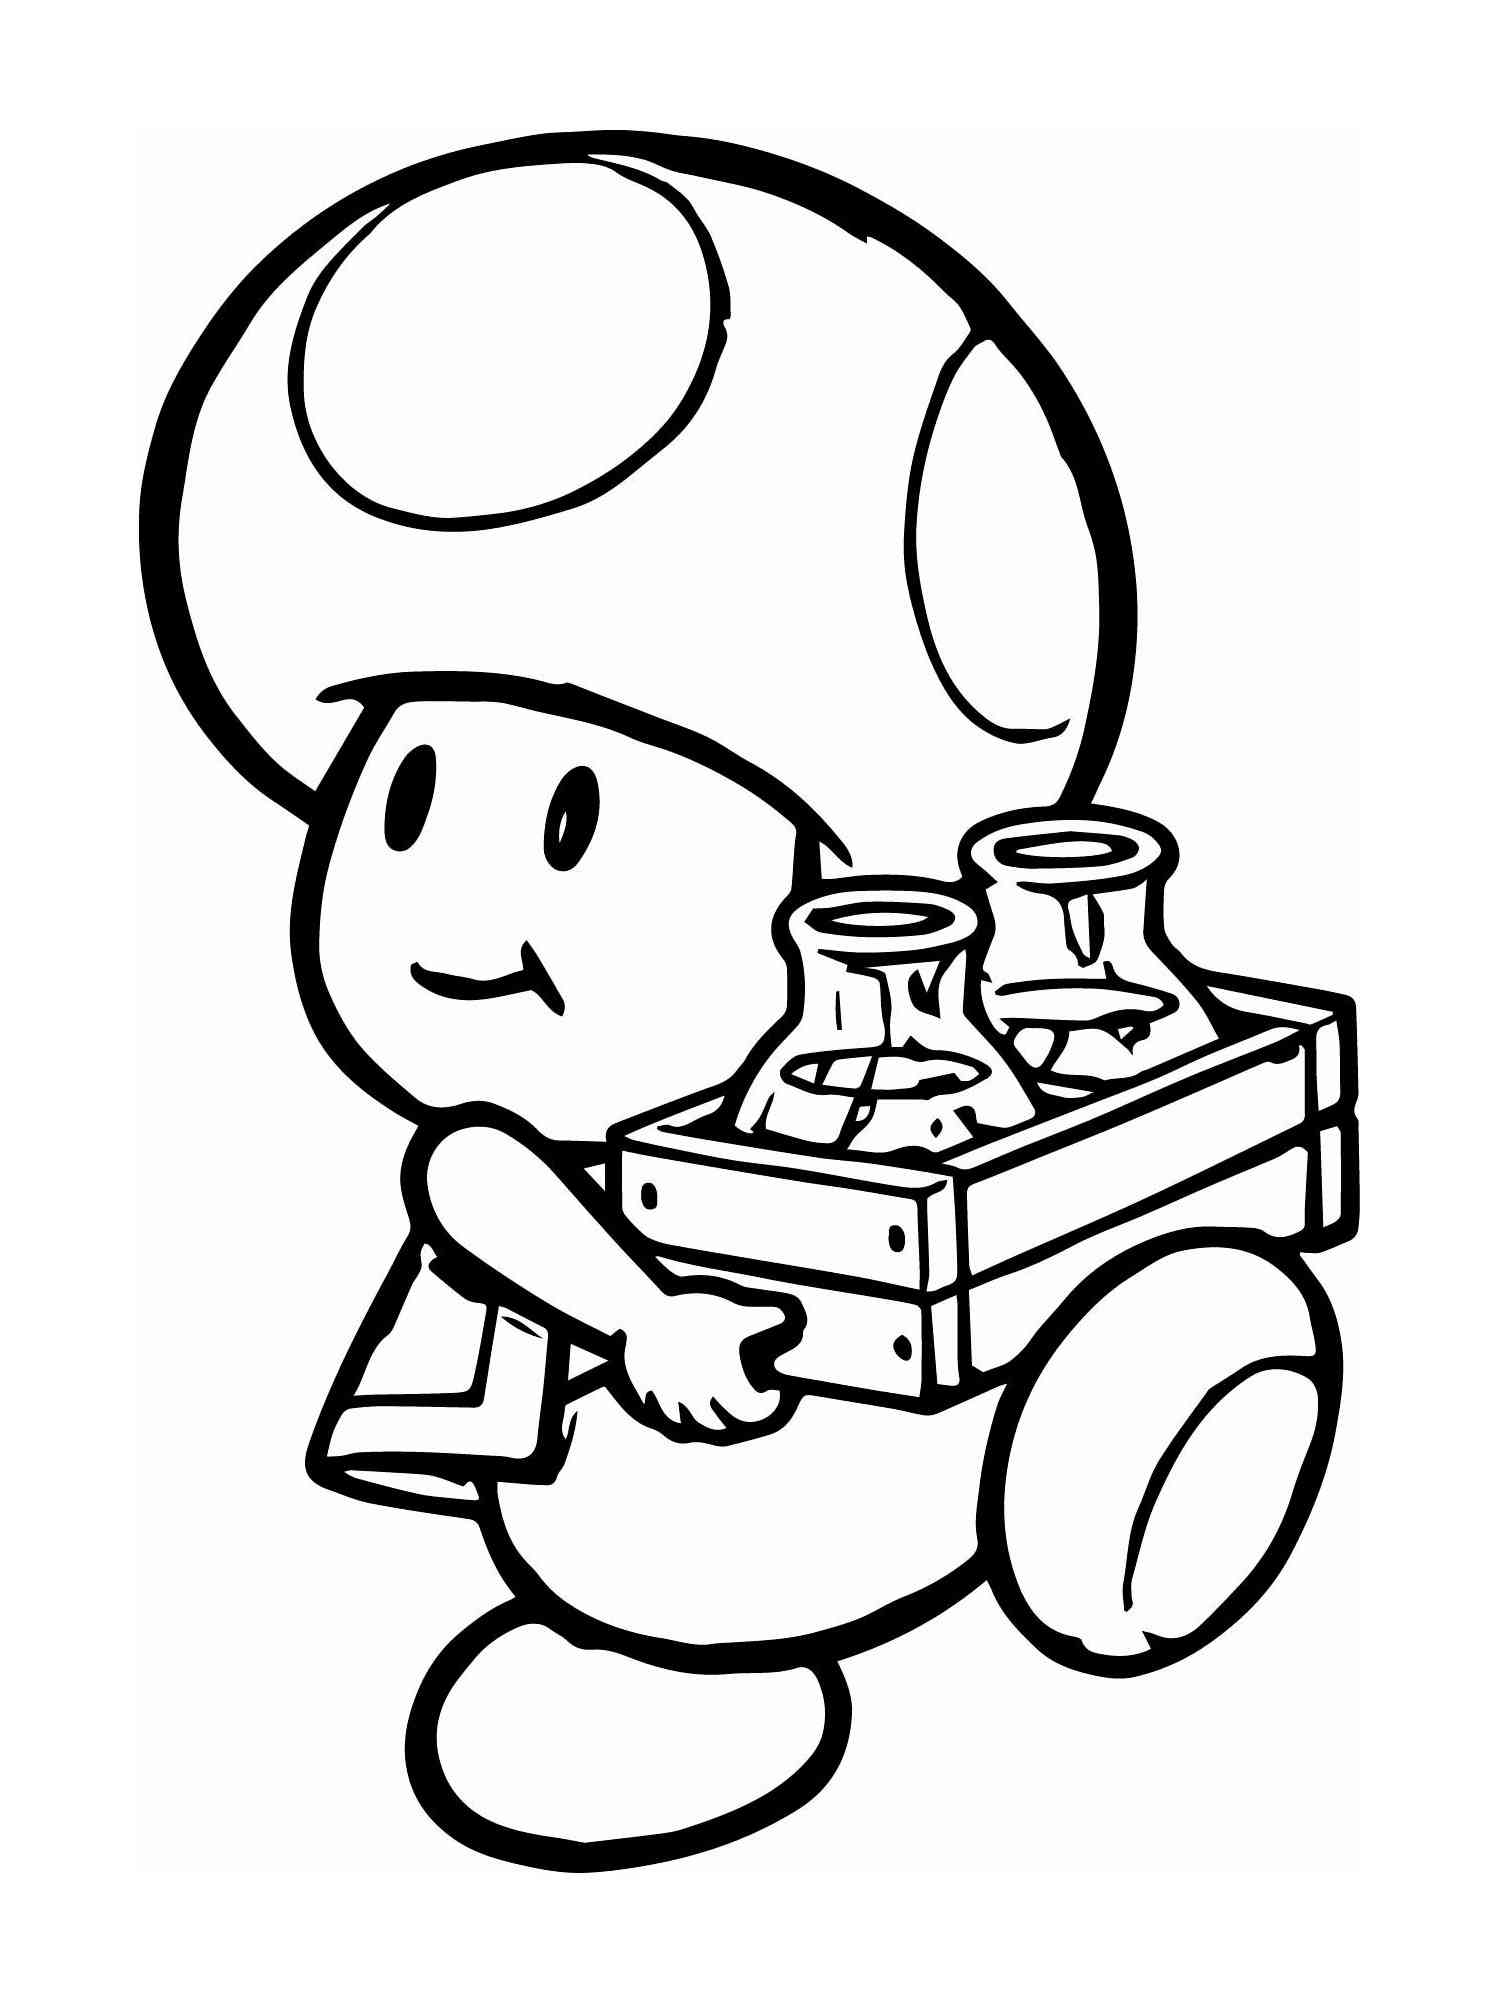 Toad from Super Mario coloring page